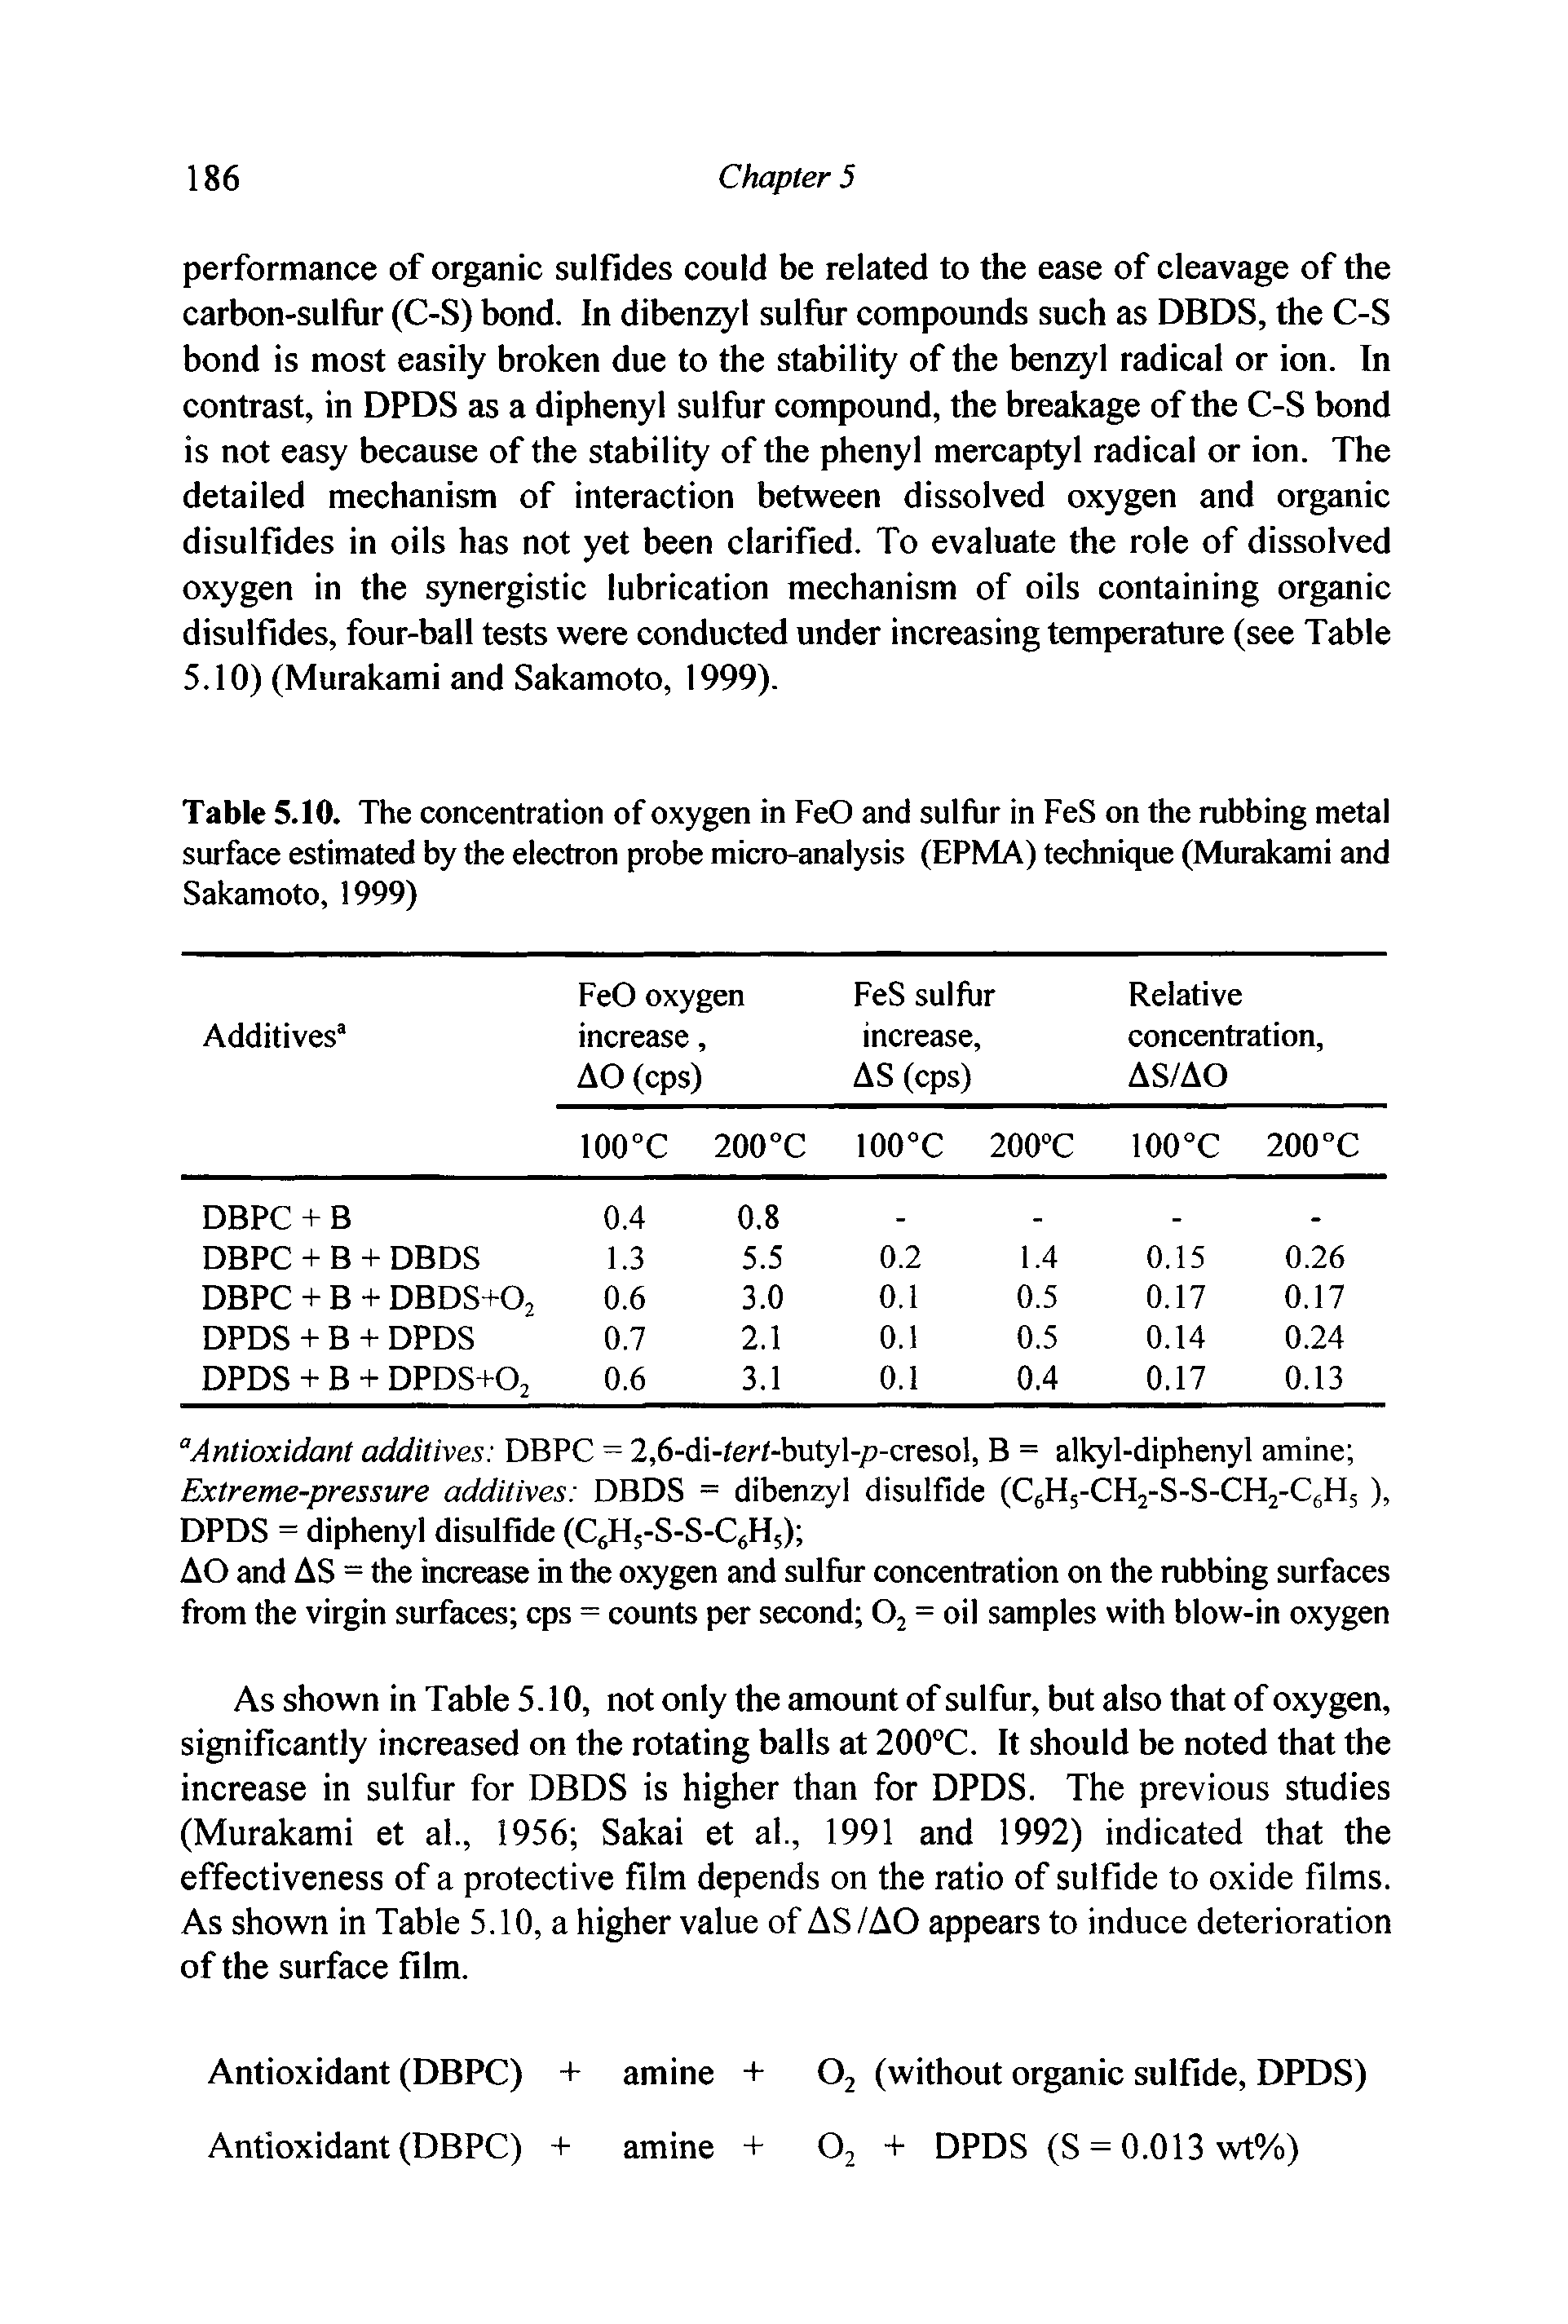 Table 5.10. The concentration of oxygen in FeO and sulfur in FeS on the rubbing metal surface estimated by the electron probe micro-analysis (EPMA) technique (Murakami and Sakamoto, 1999)...